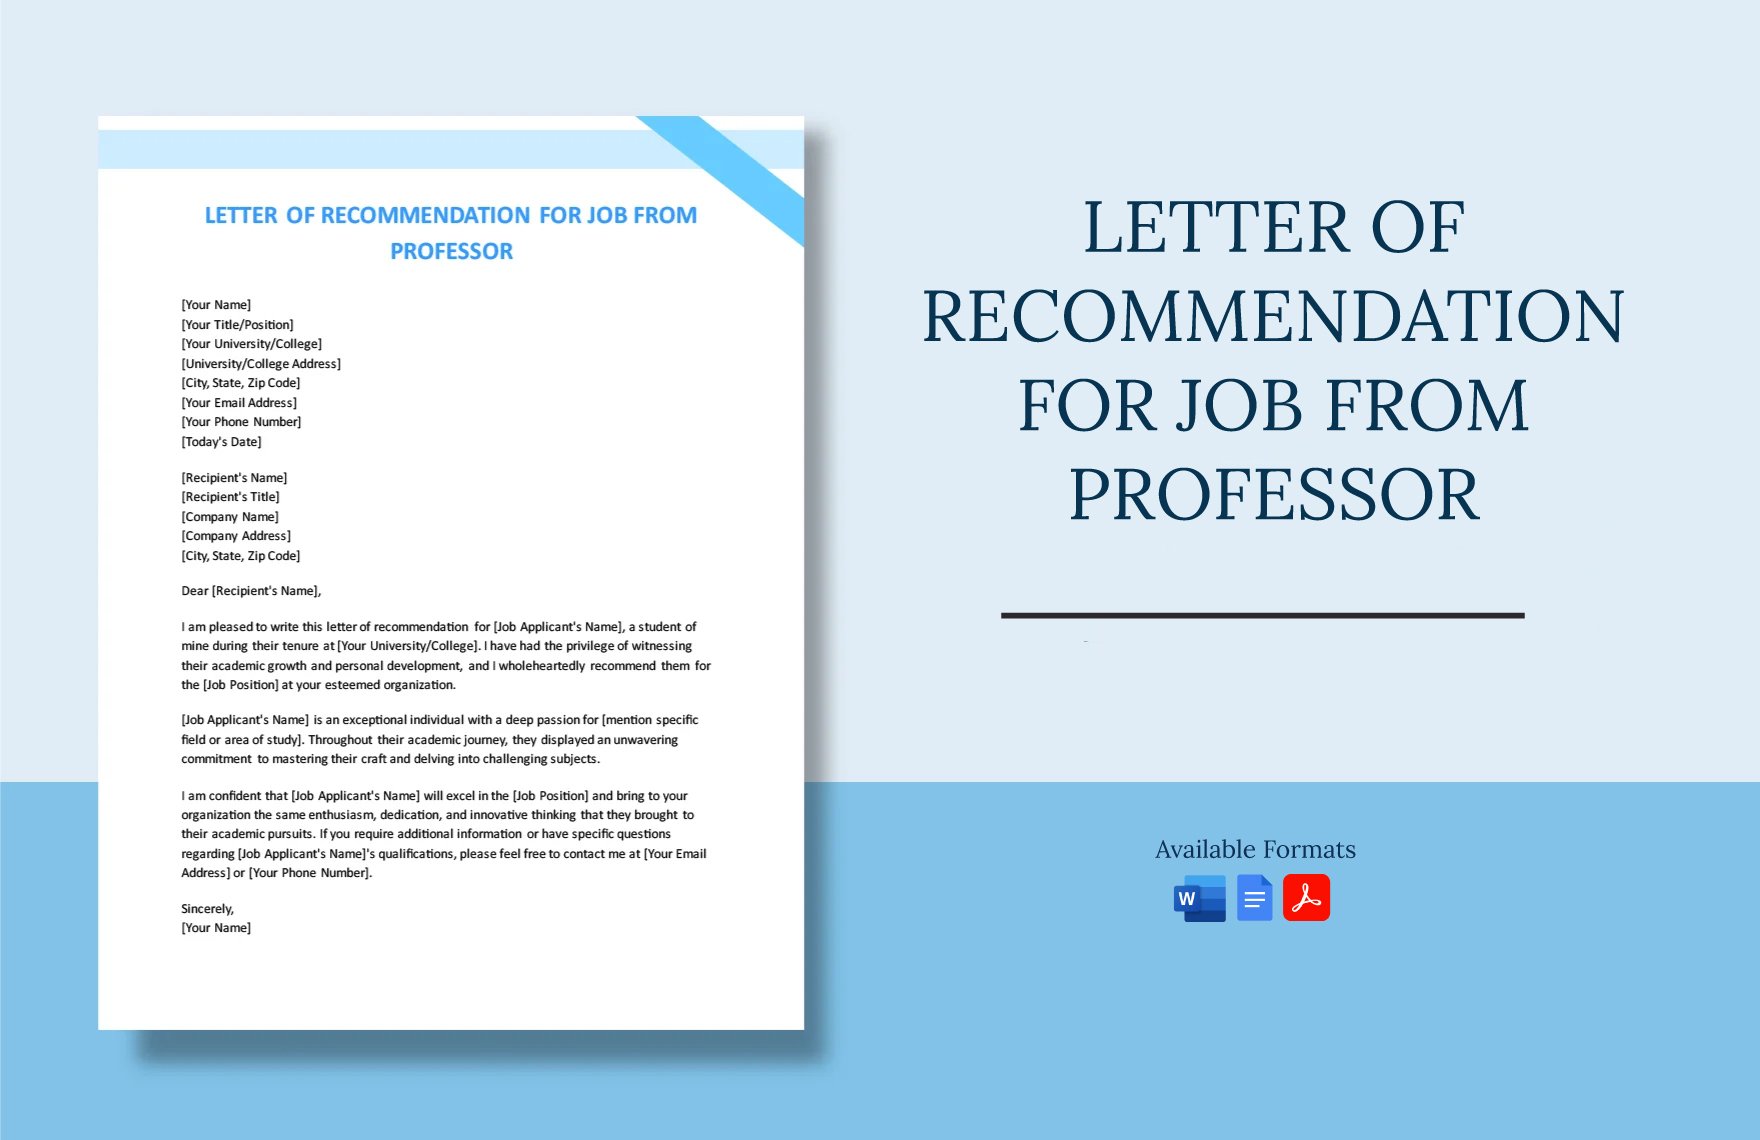 Letter Of Recommendation For Job From Professor in Word, Google Docs, PDF